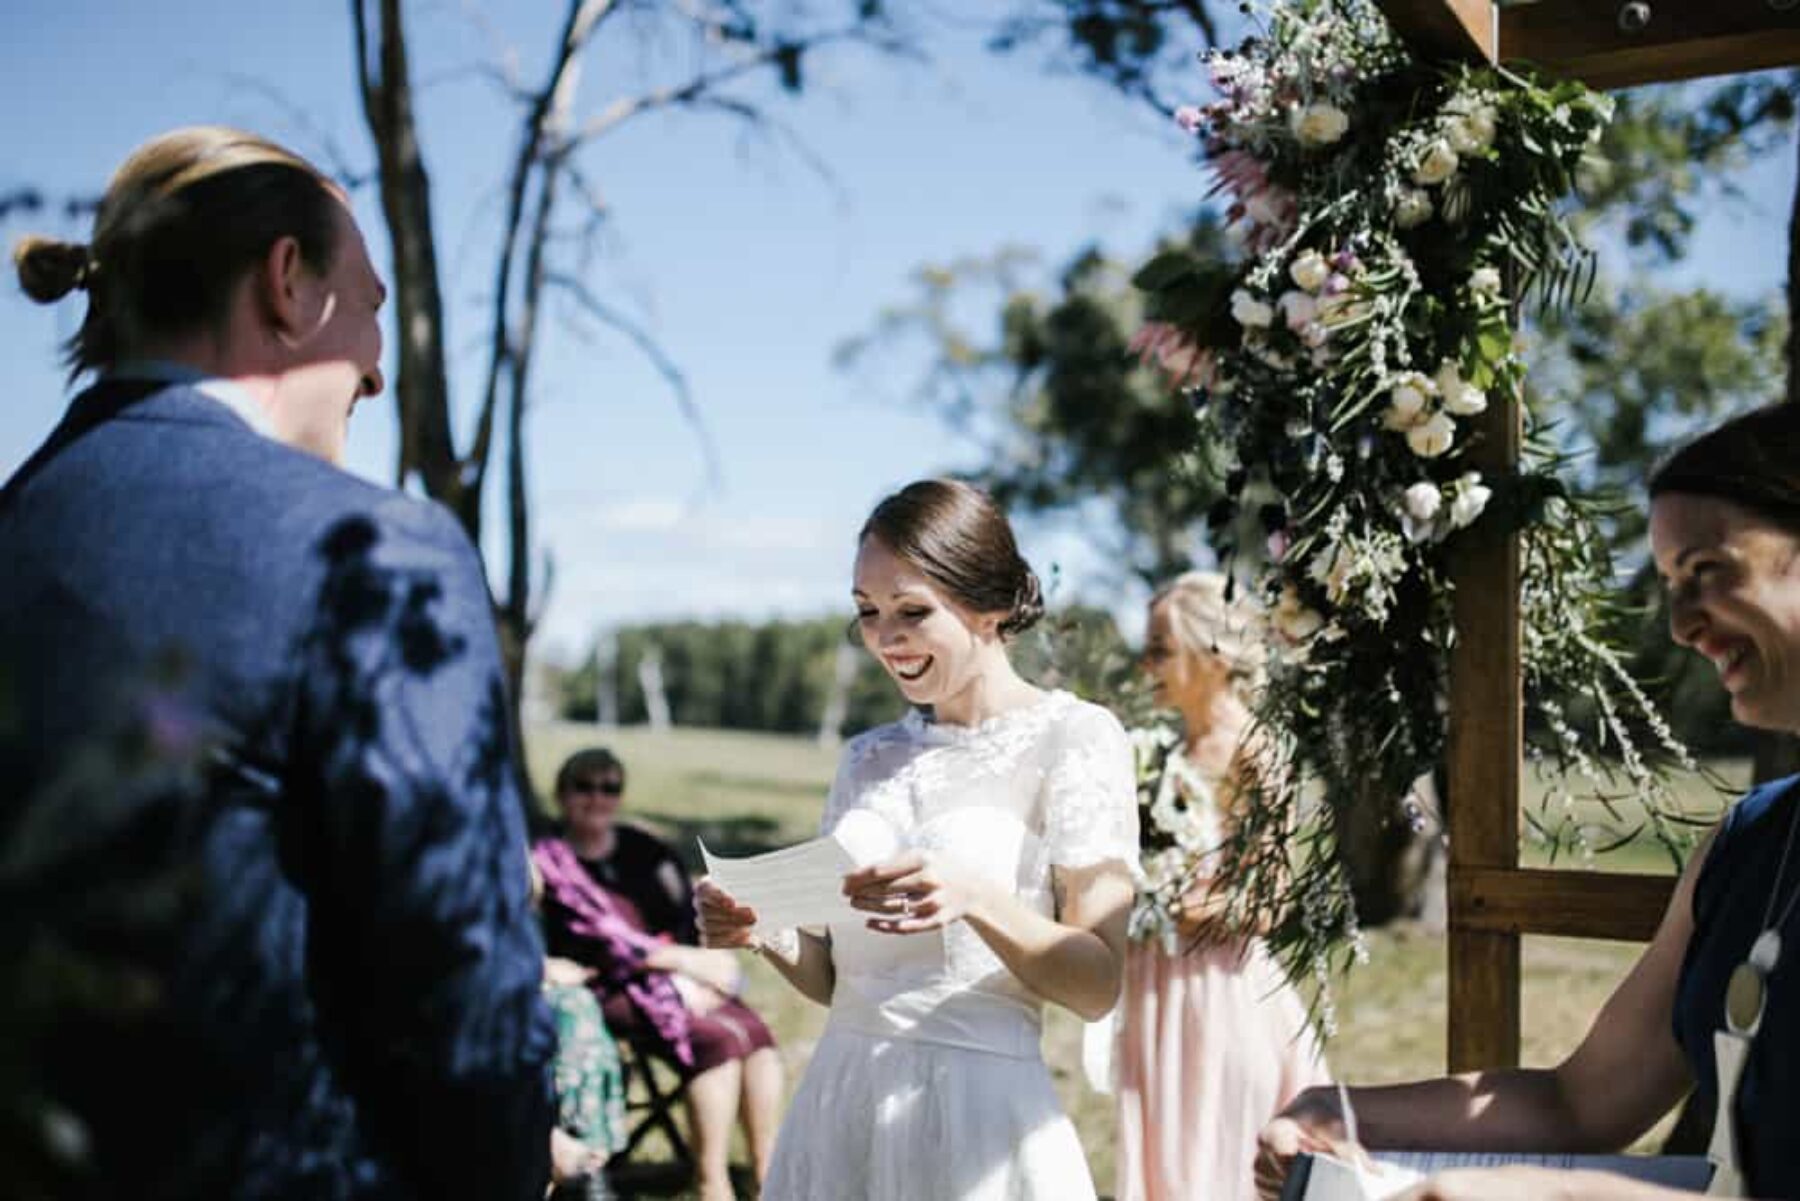 Rustic barn wedding in Kyneton Victoria / Photography by Brown Paper Parcel